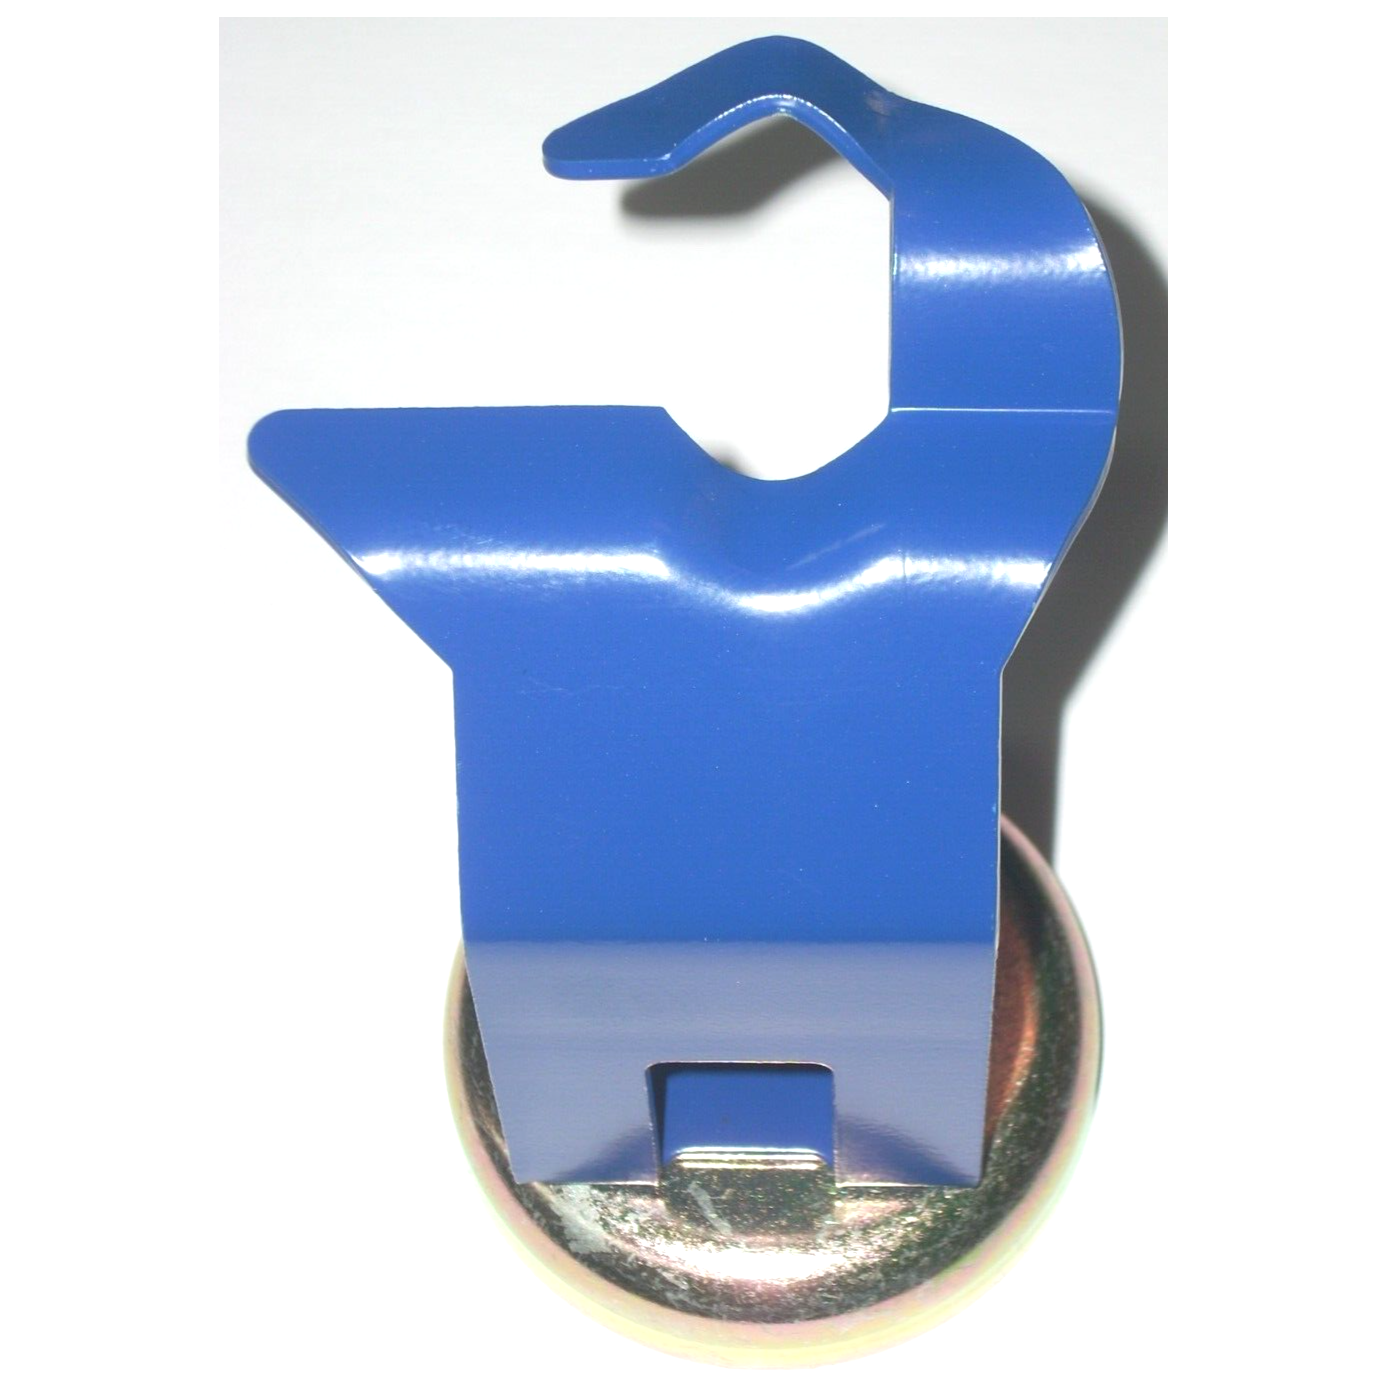 Magnetic Mig Welding Torch Holder Stand Blue